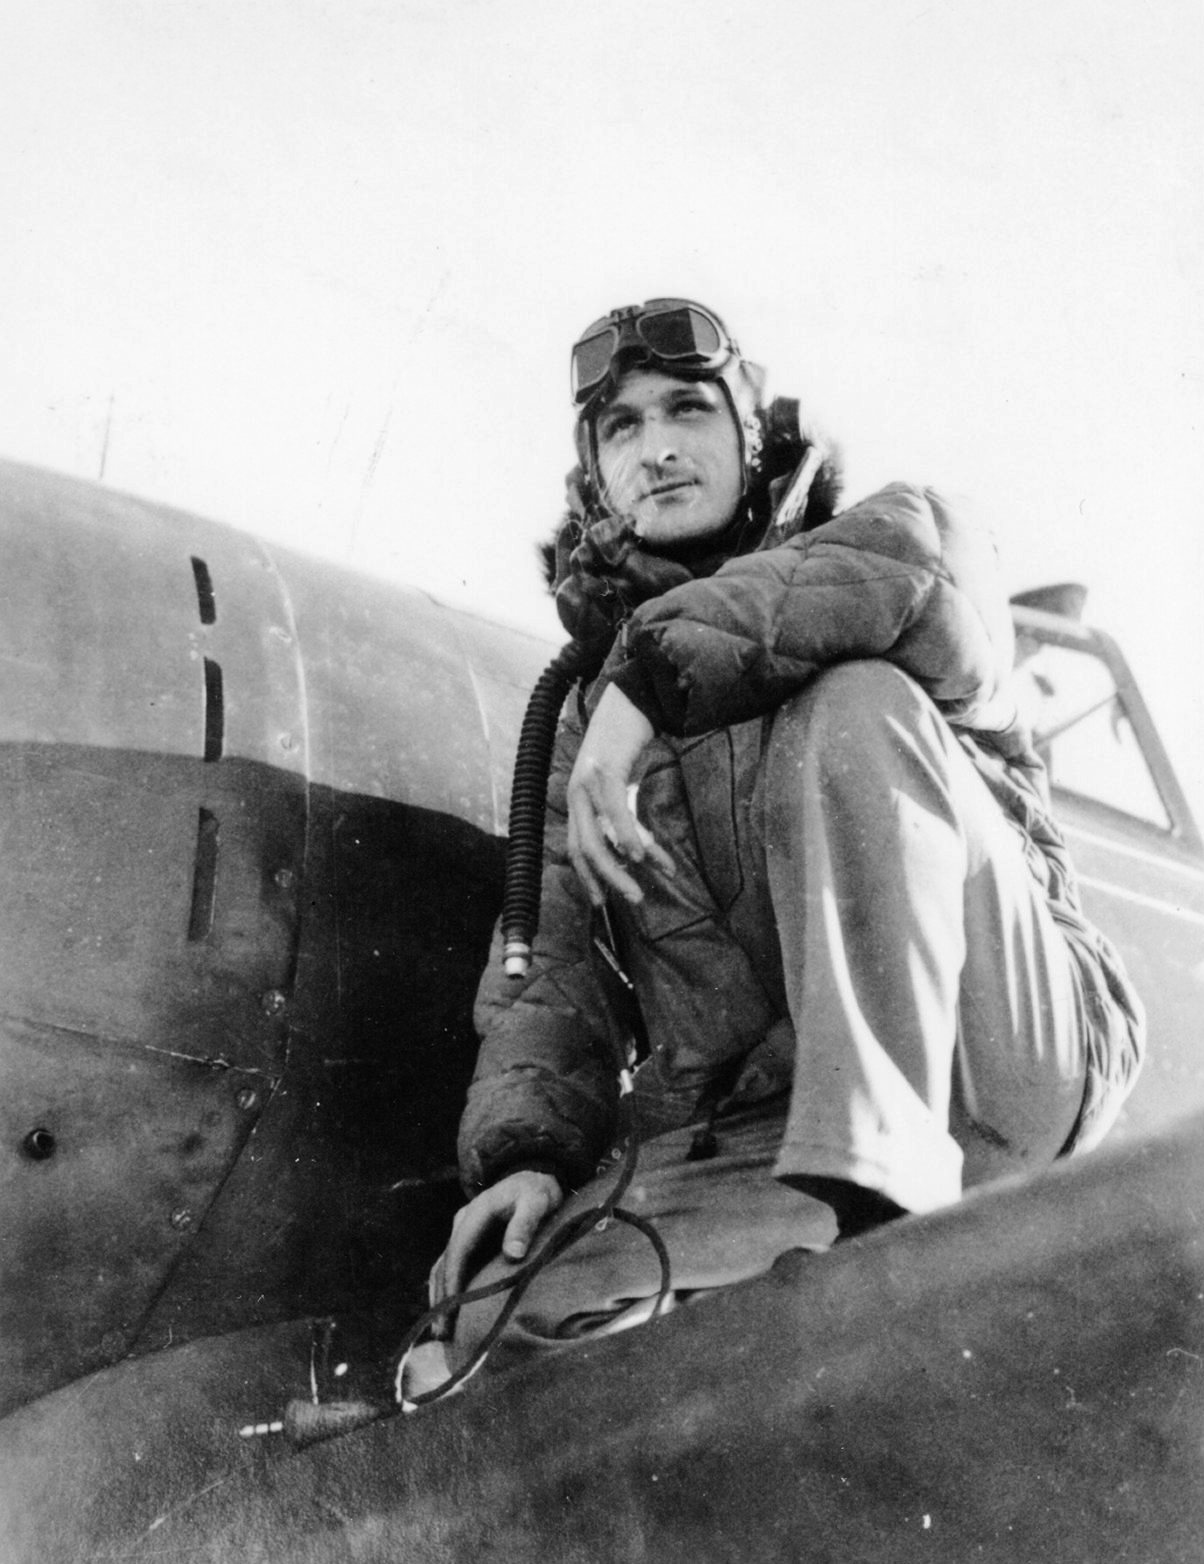 On August 16, 1944, Col. John B. Murphy of the 370th FS/359th FG observed an Me 163 Komet setting up an attack on a B-17 straggler. Col. Murphy dove on the rocket fighter, which broke off its attack, and sent it down in flames after a few well-aimed bursts. This was the second Me 163 to fall to Allied guns and Col Murphy was awarded his fifth Distinguished Flying Cross. (photo via Janet Fogg- 359th FG Association)